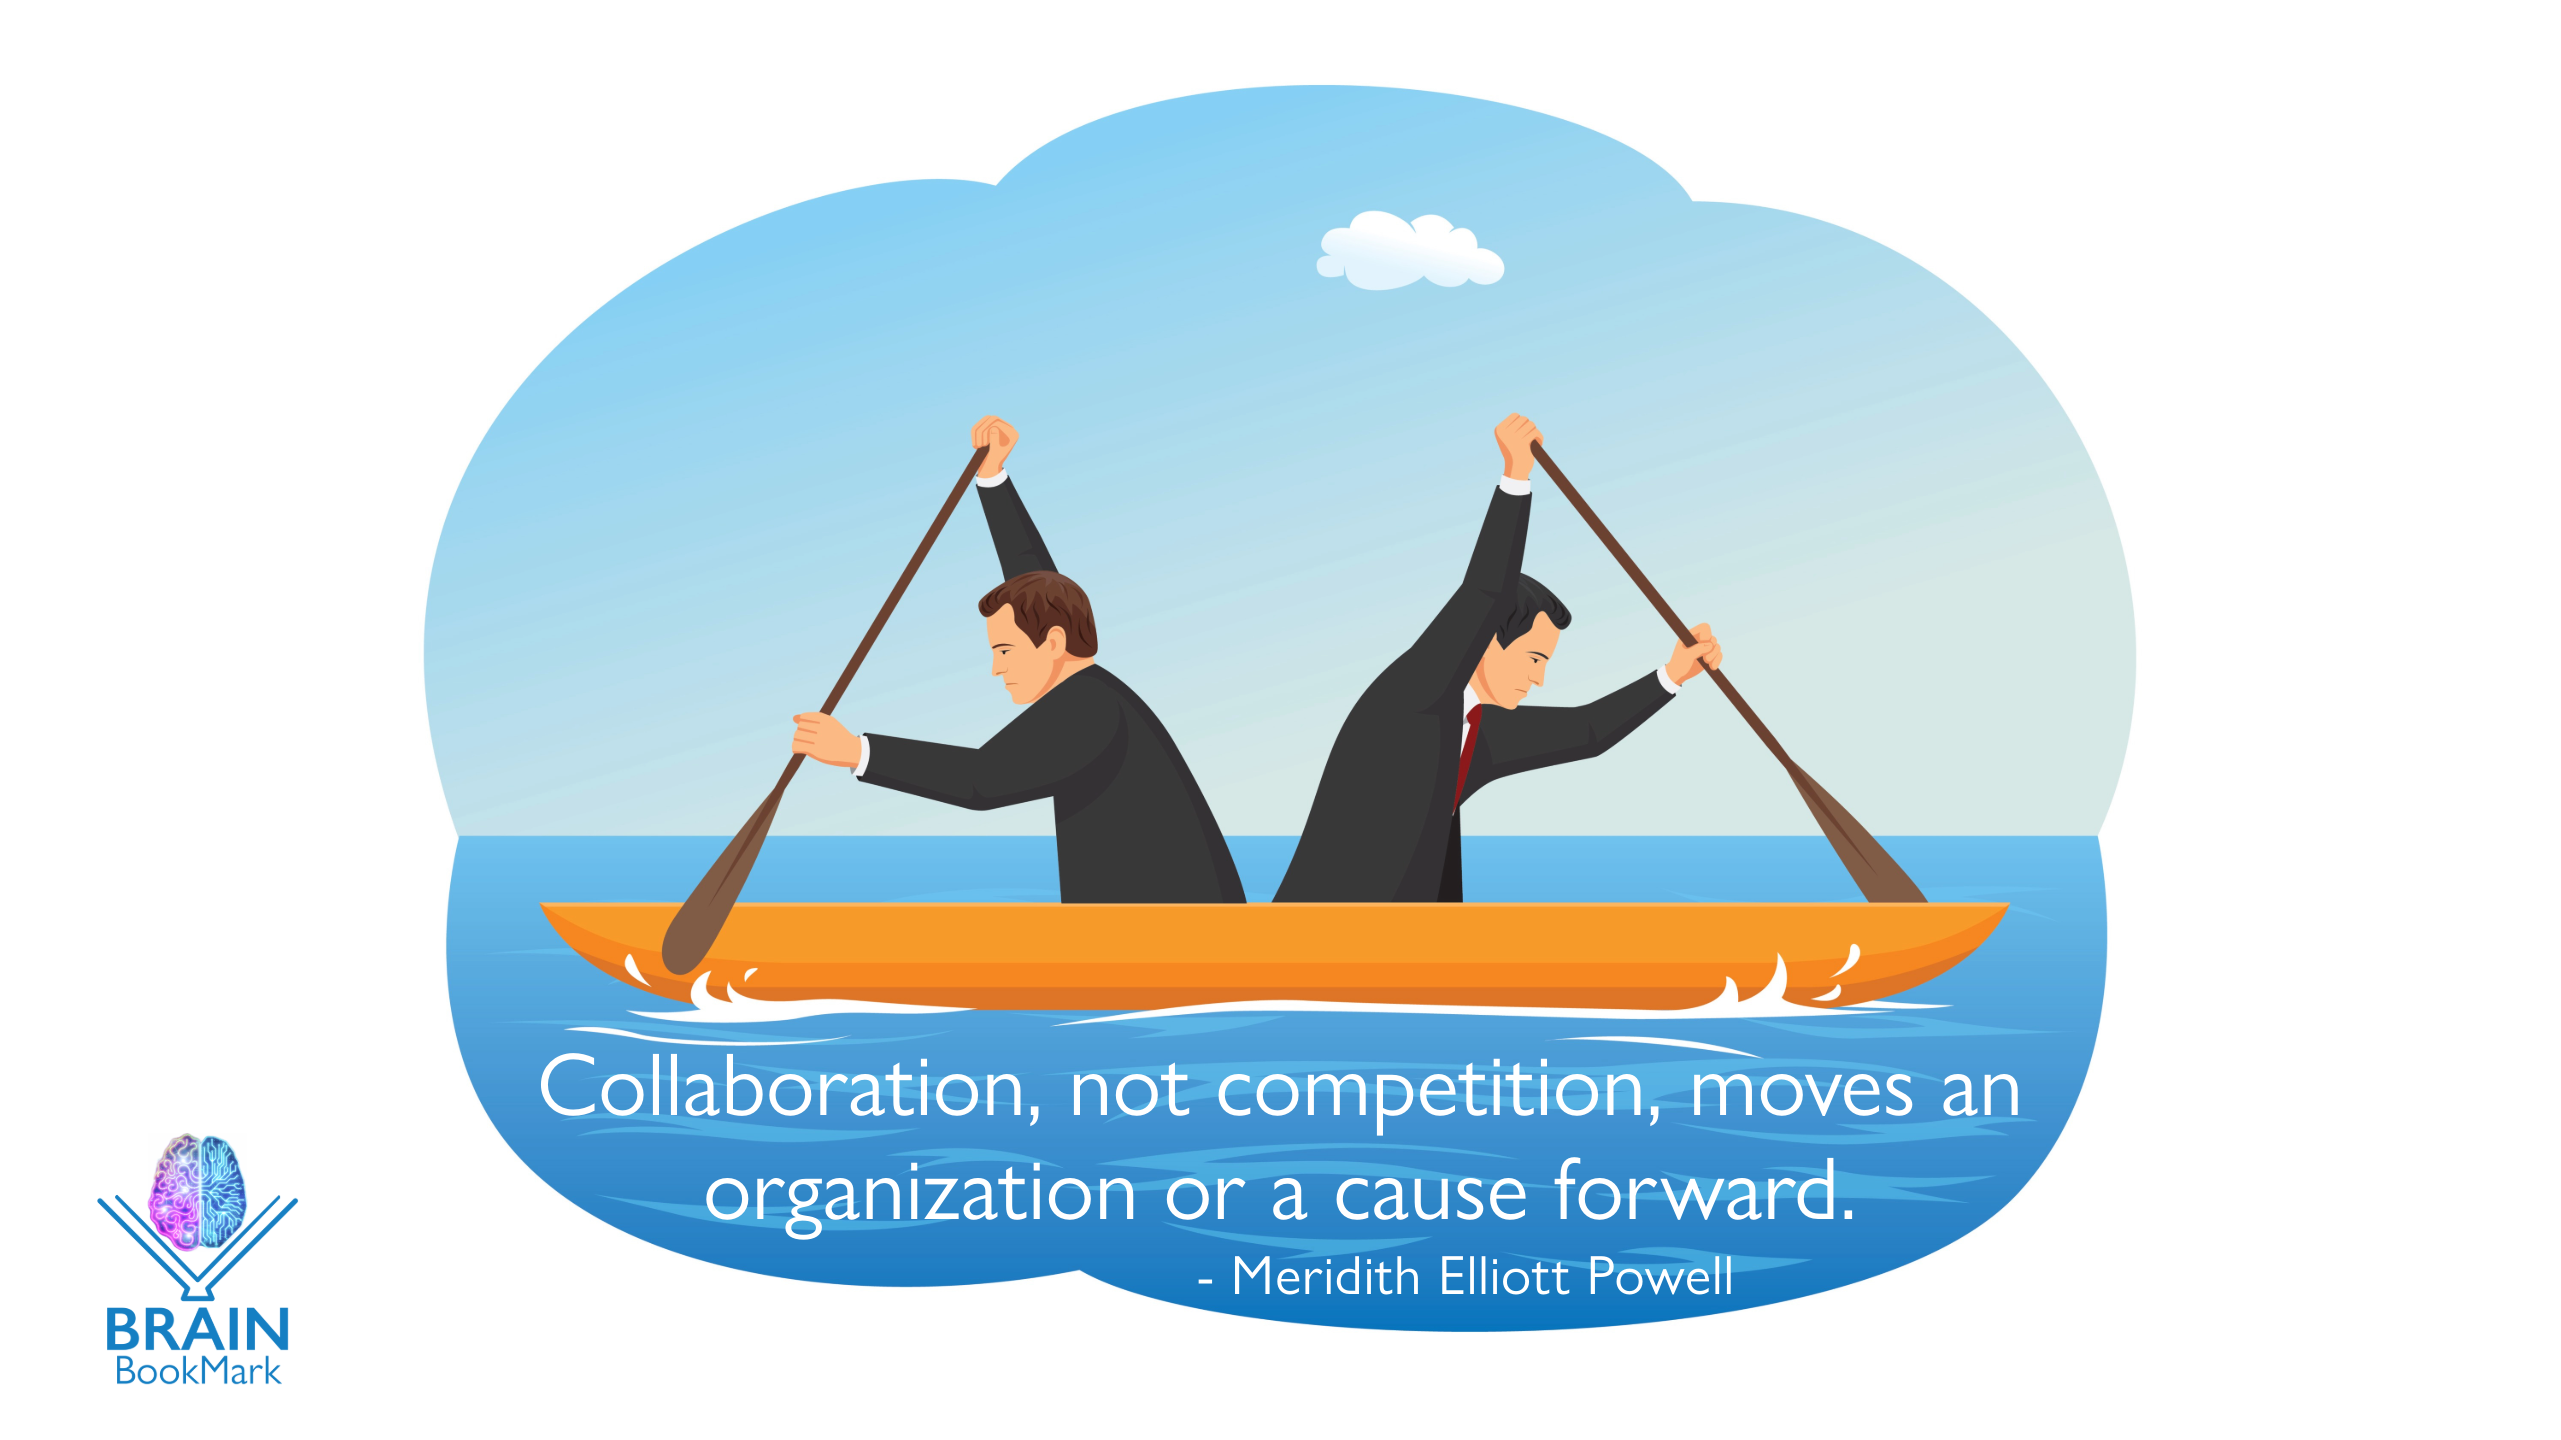 Collaboration, not competition, moves an organization or a cause forward. - Meridith Elliott Powell